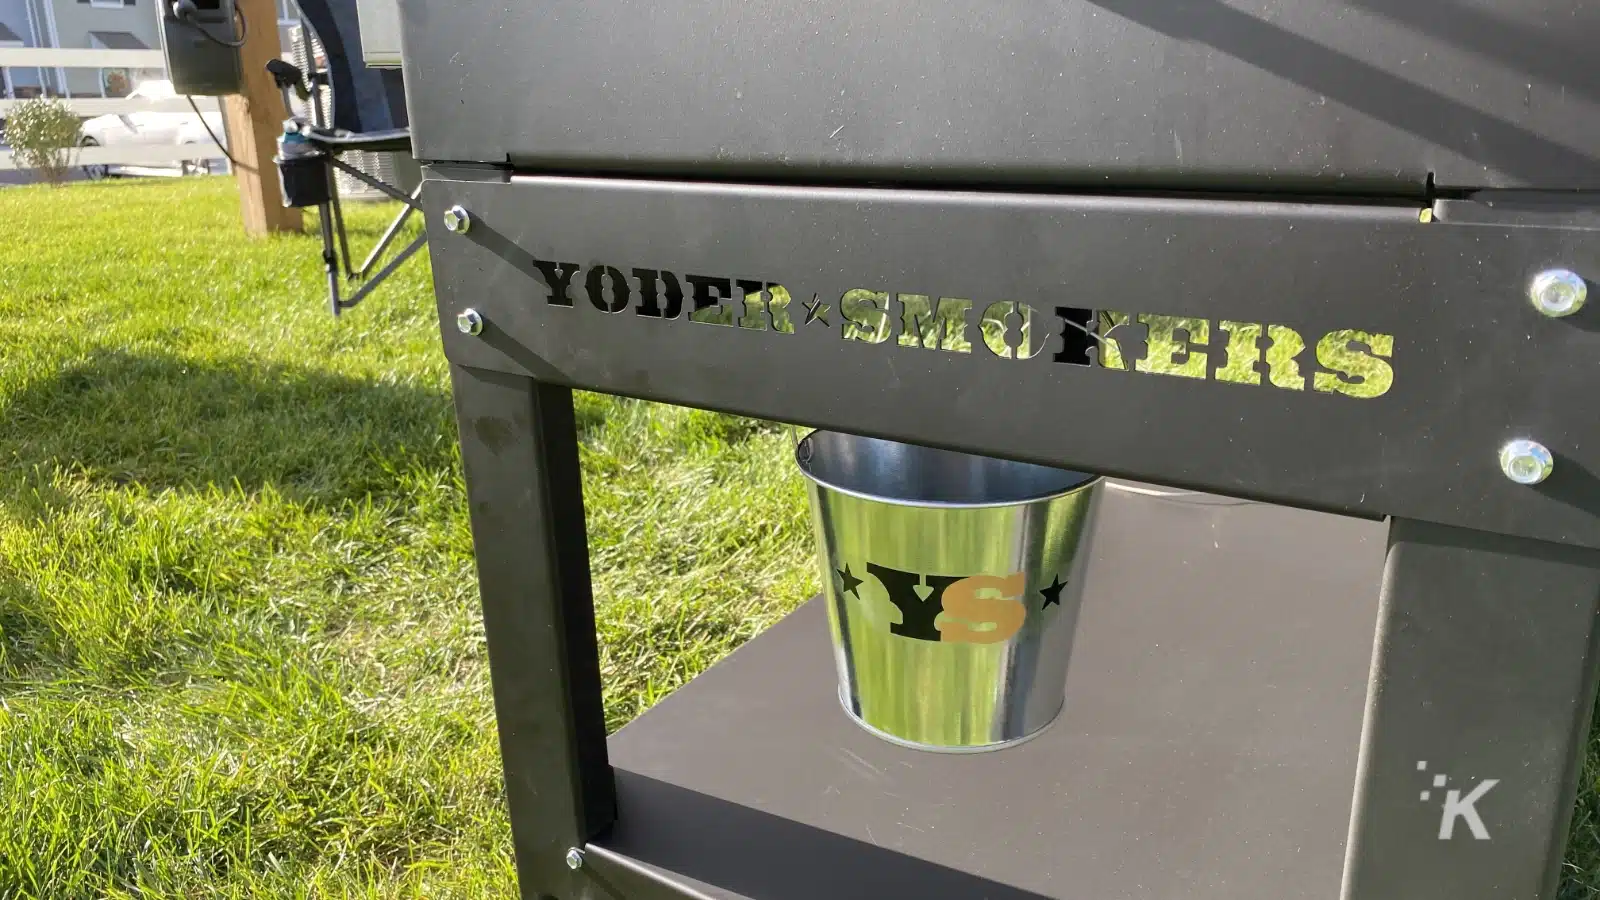 yoder branding above the grease catcher